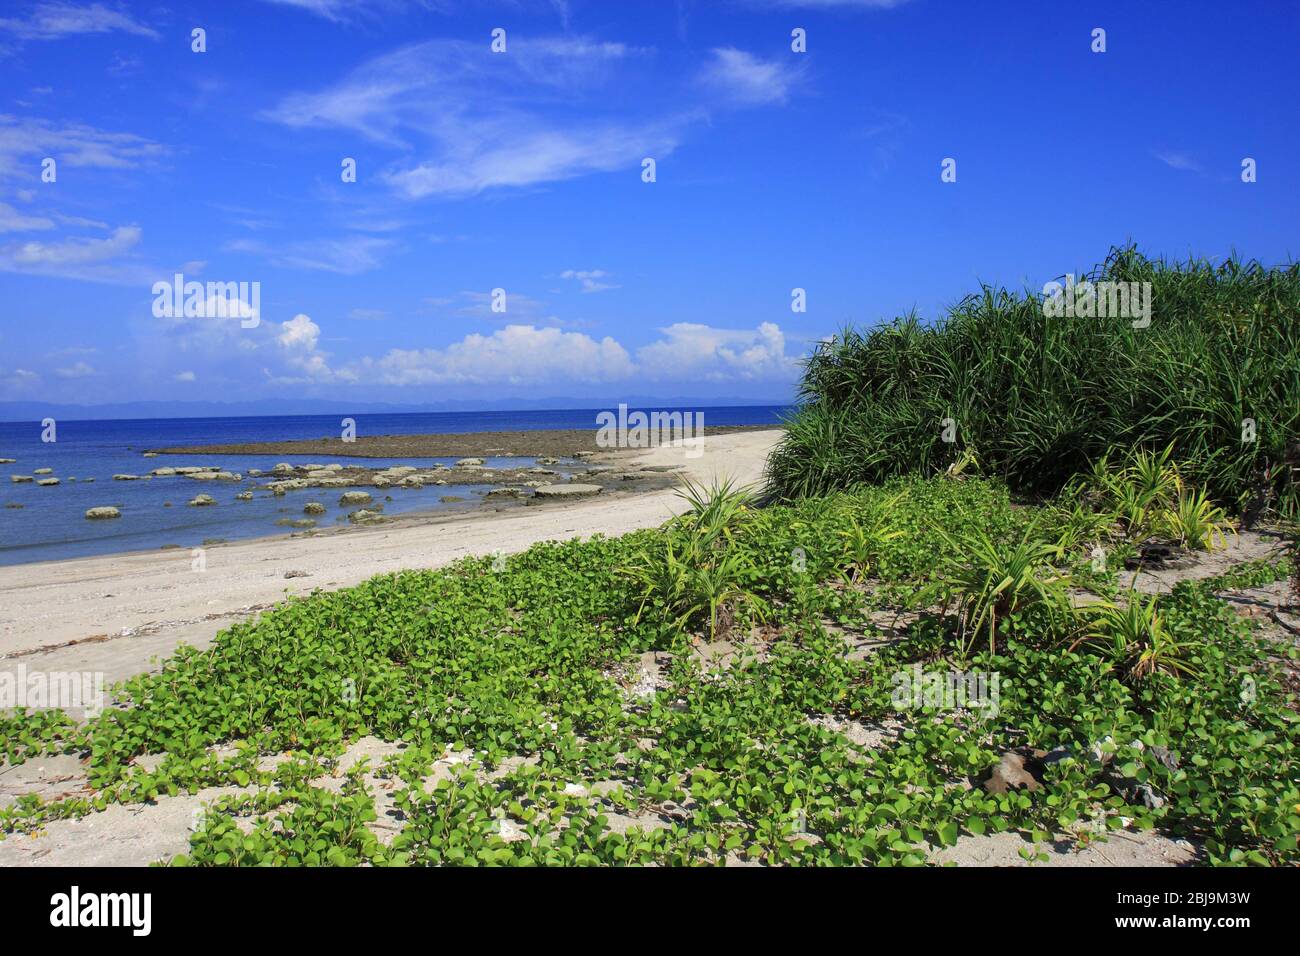 The Saint Martin's Island, locally known as Narkel Jinjira, is the only coral island and one of the most famous tourist spots of Bangladesh. Stock Photo